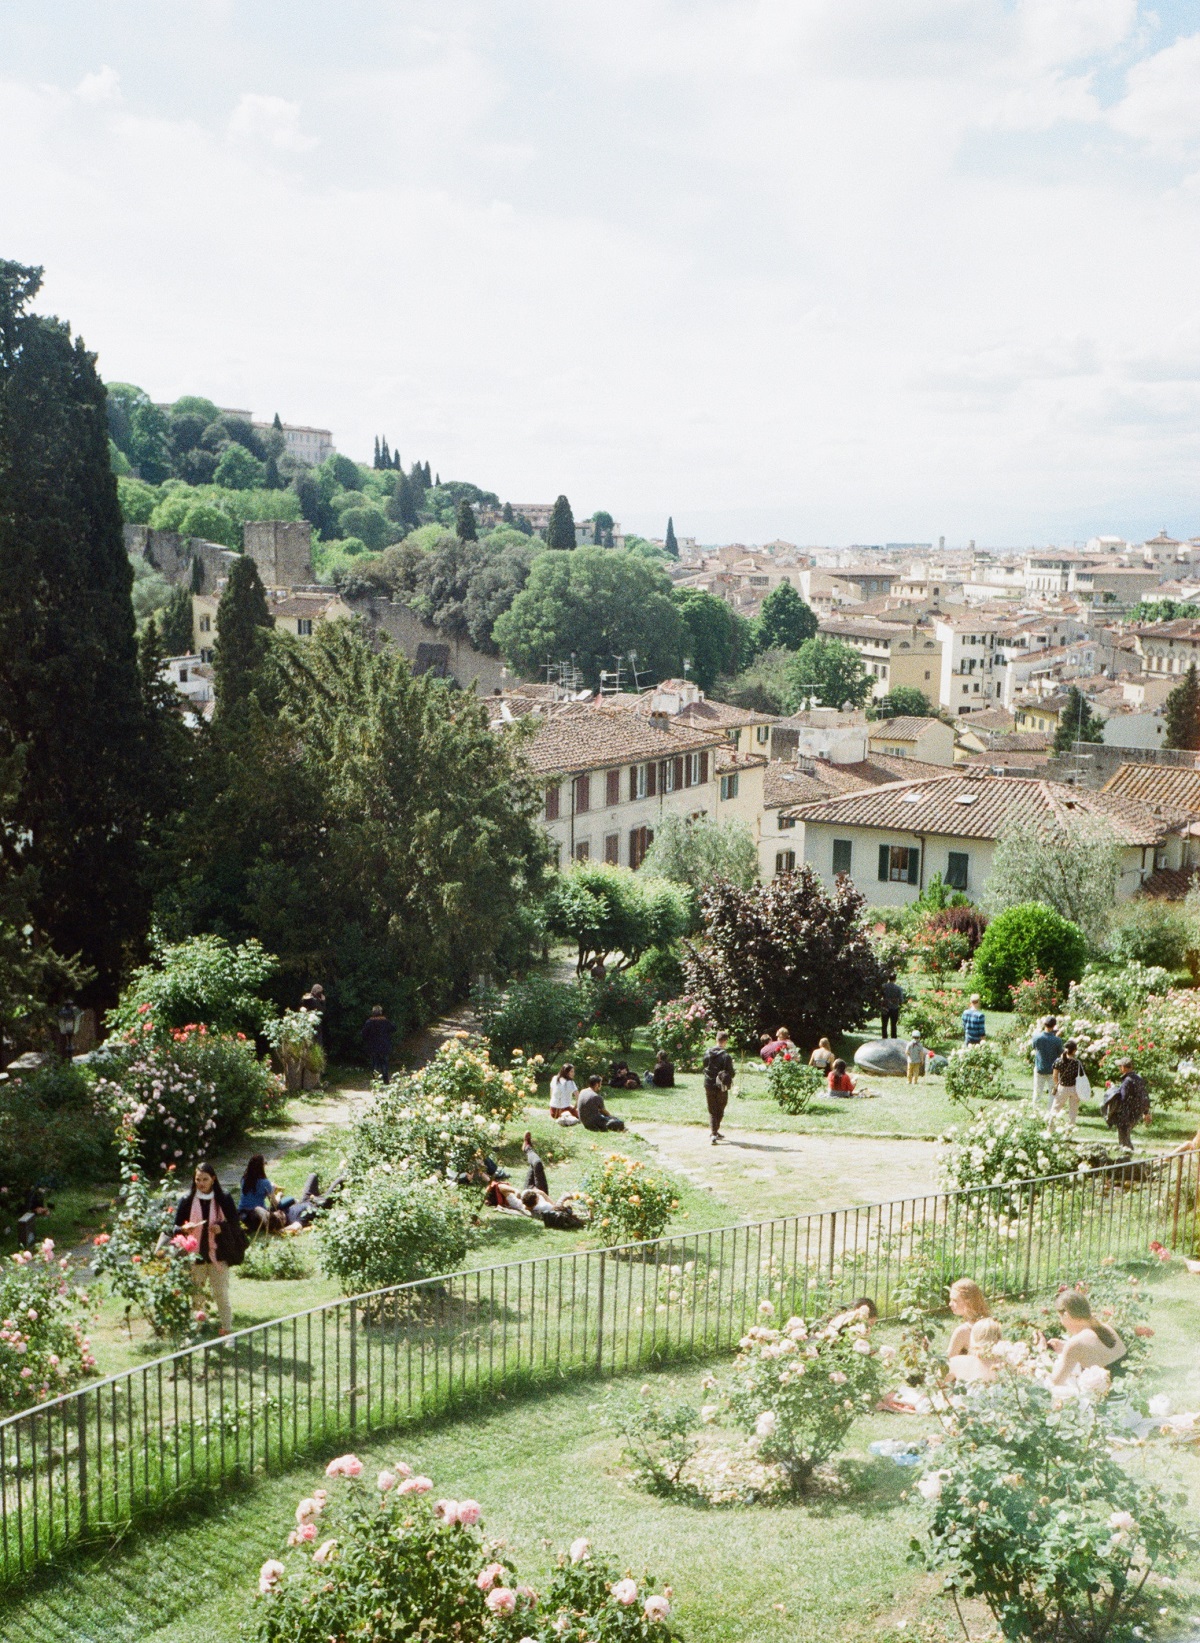 Rose garden in florence with many visitors who are relaxing on the grass